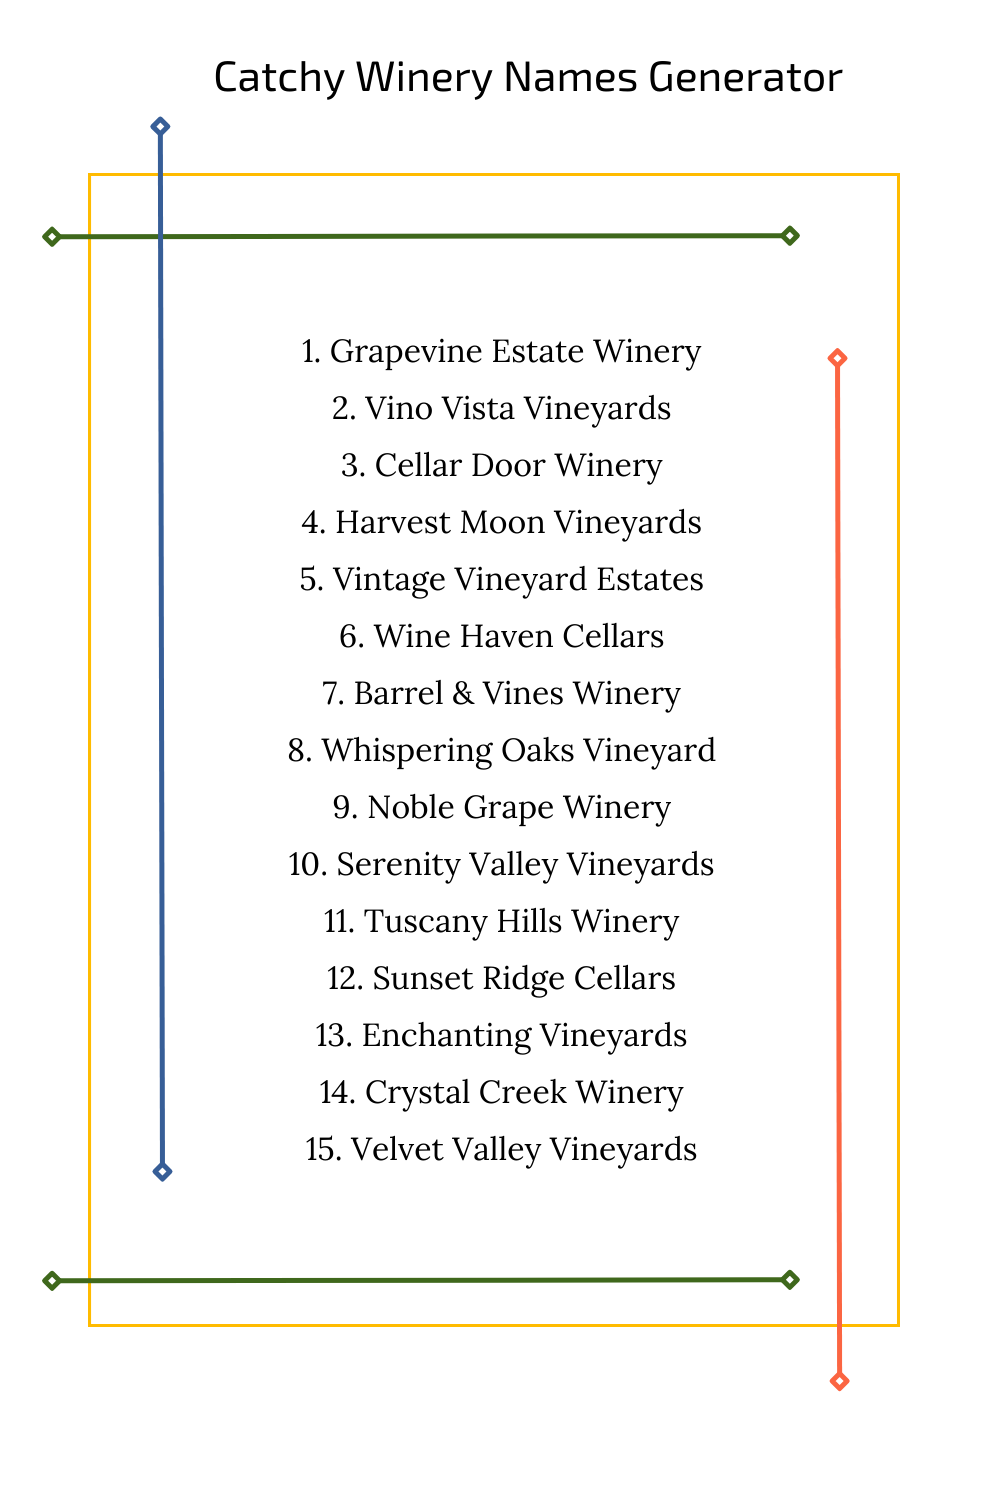 Catchy Winery Names Generator